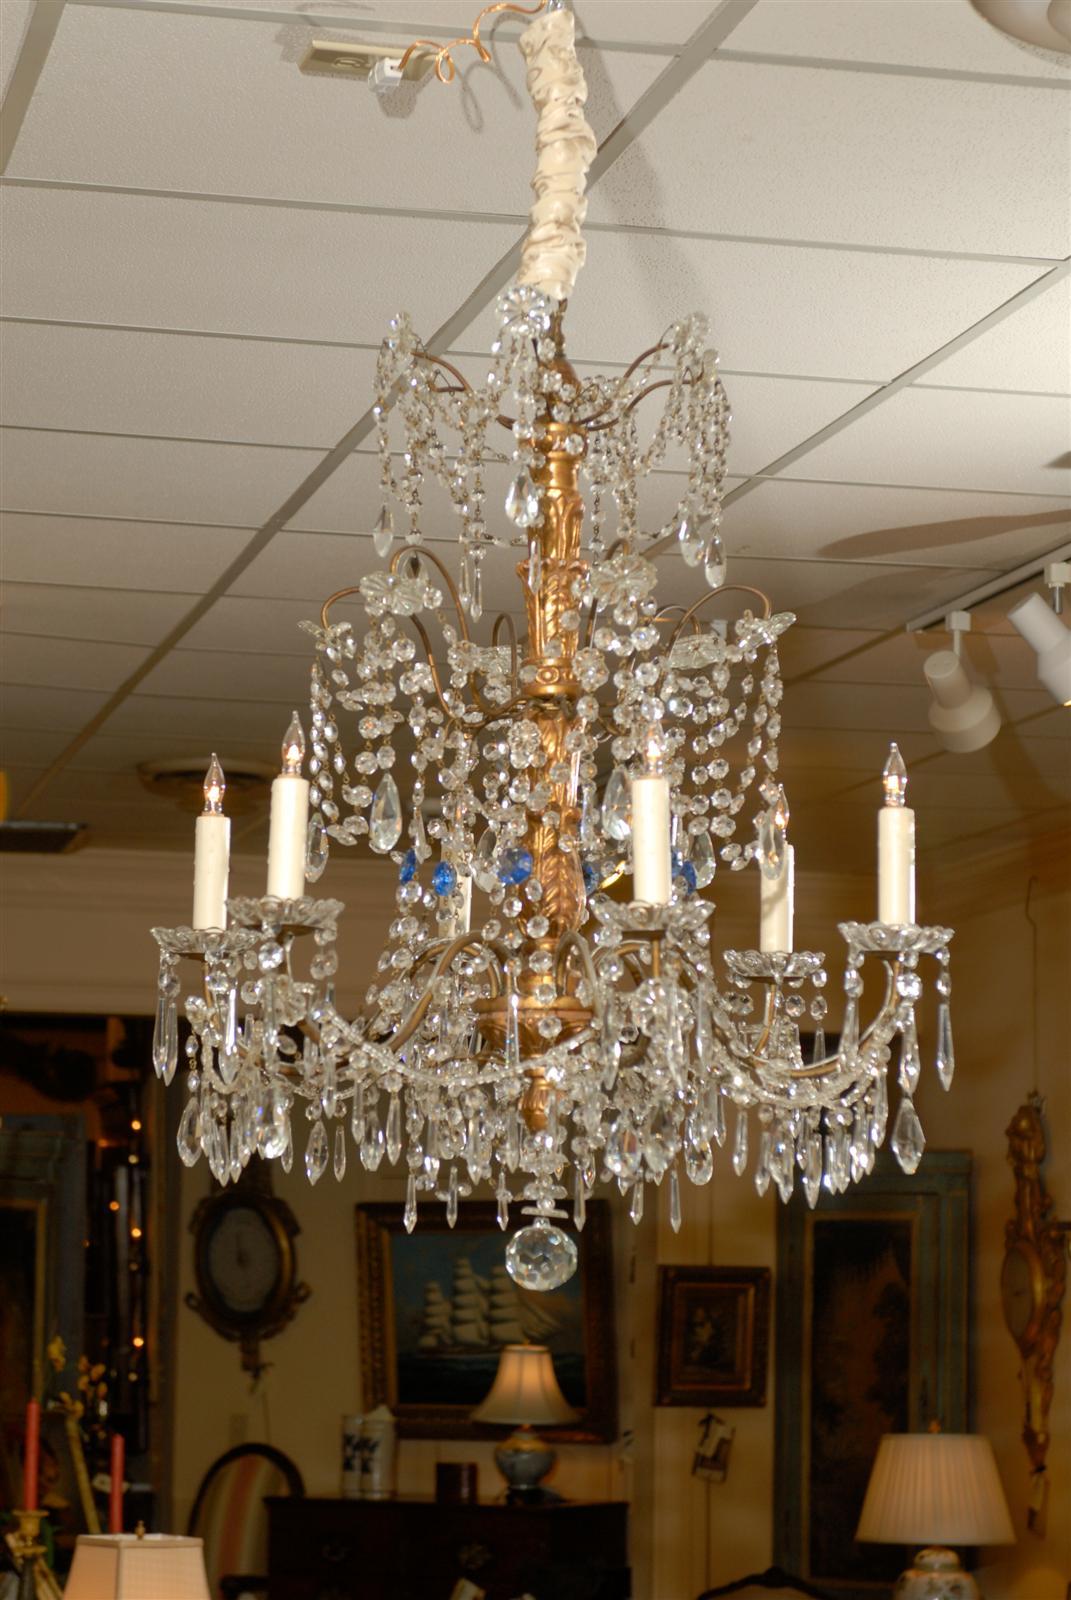 Italian neoclassical style crystal and giltwood chandelier with six-lights and blue crystal accents.

William Word fine antiques: Atlanta's source for antique interiors since 1956.